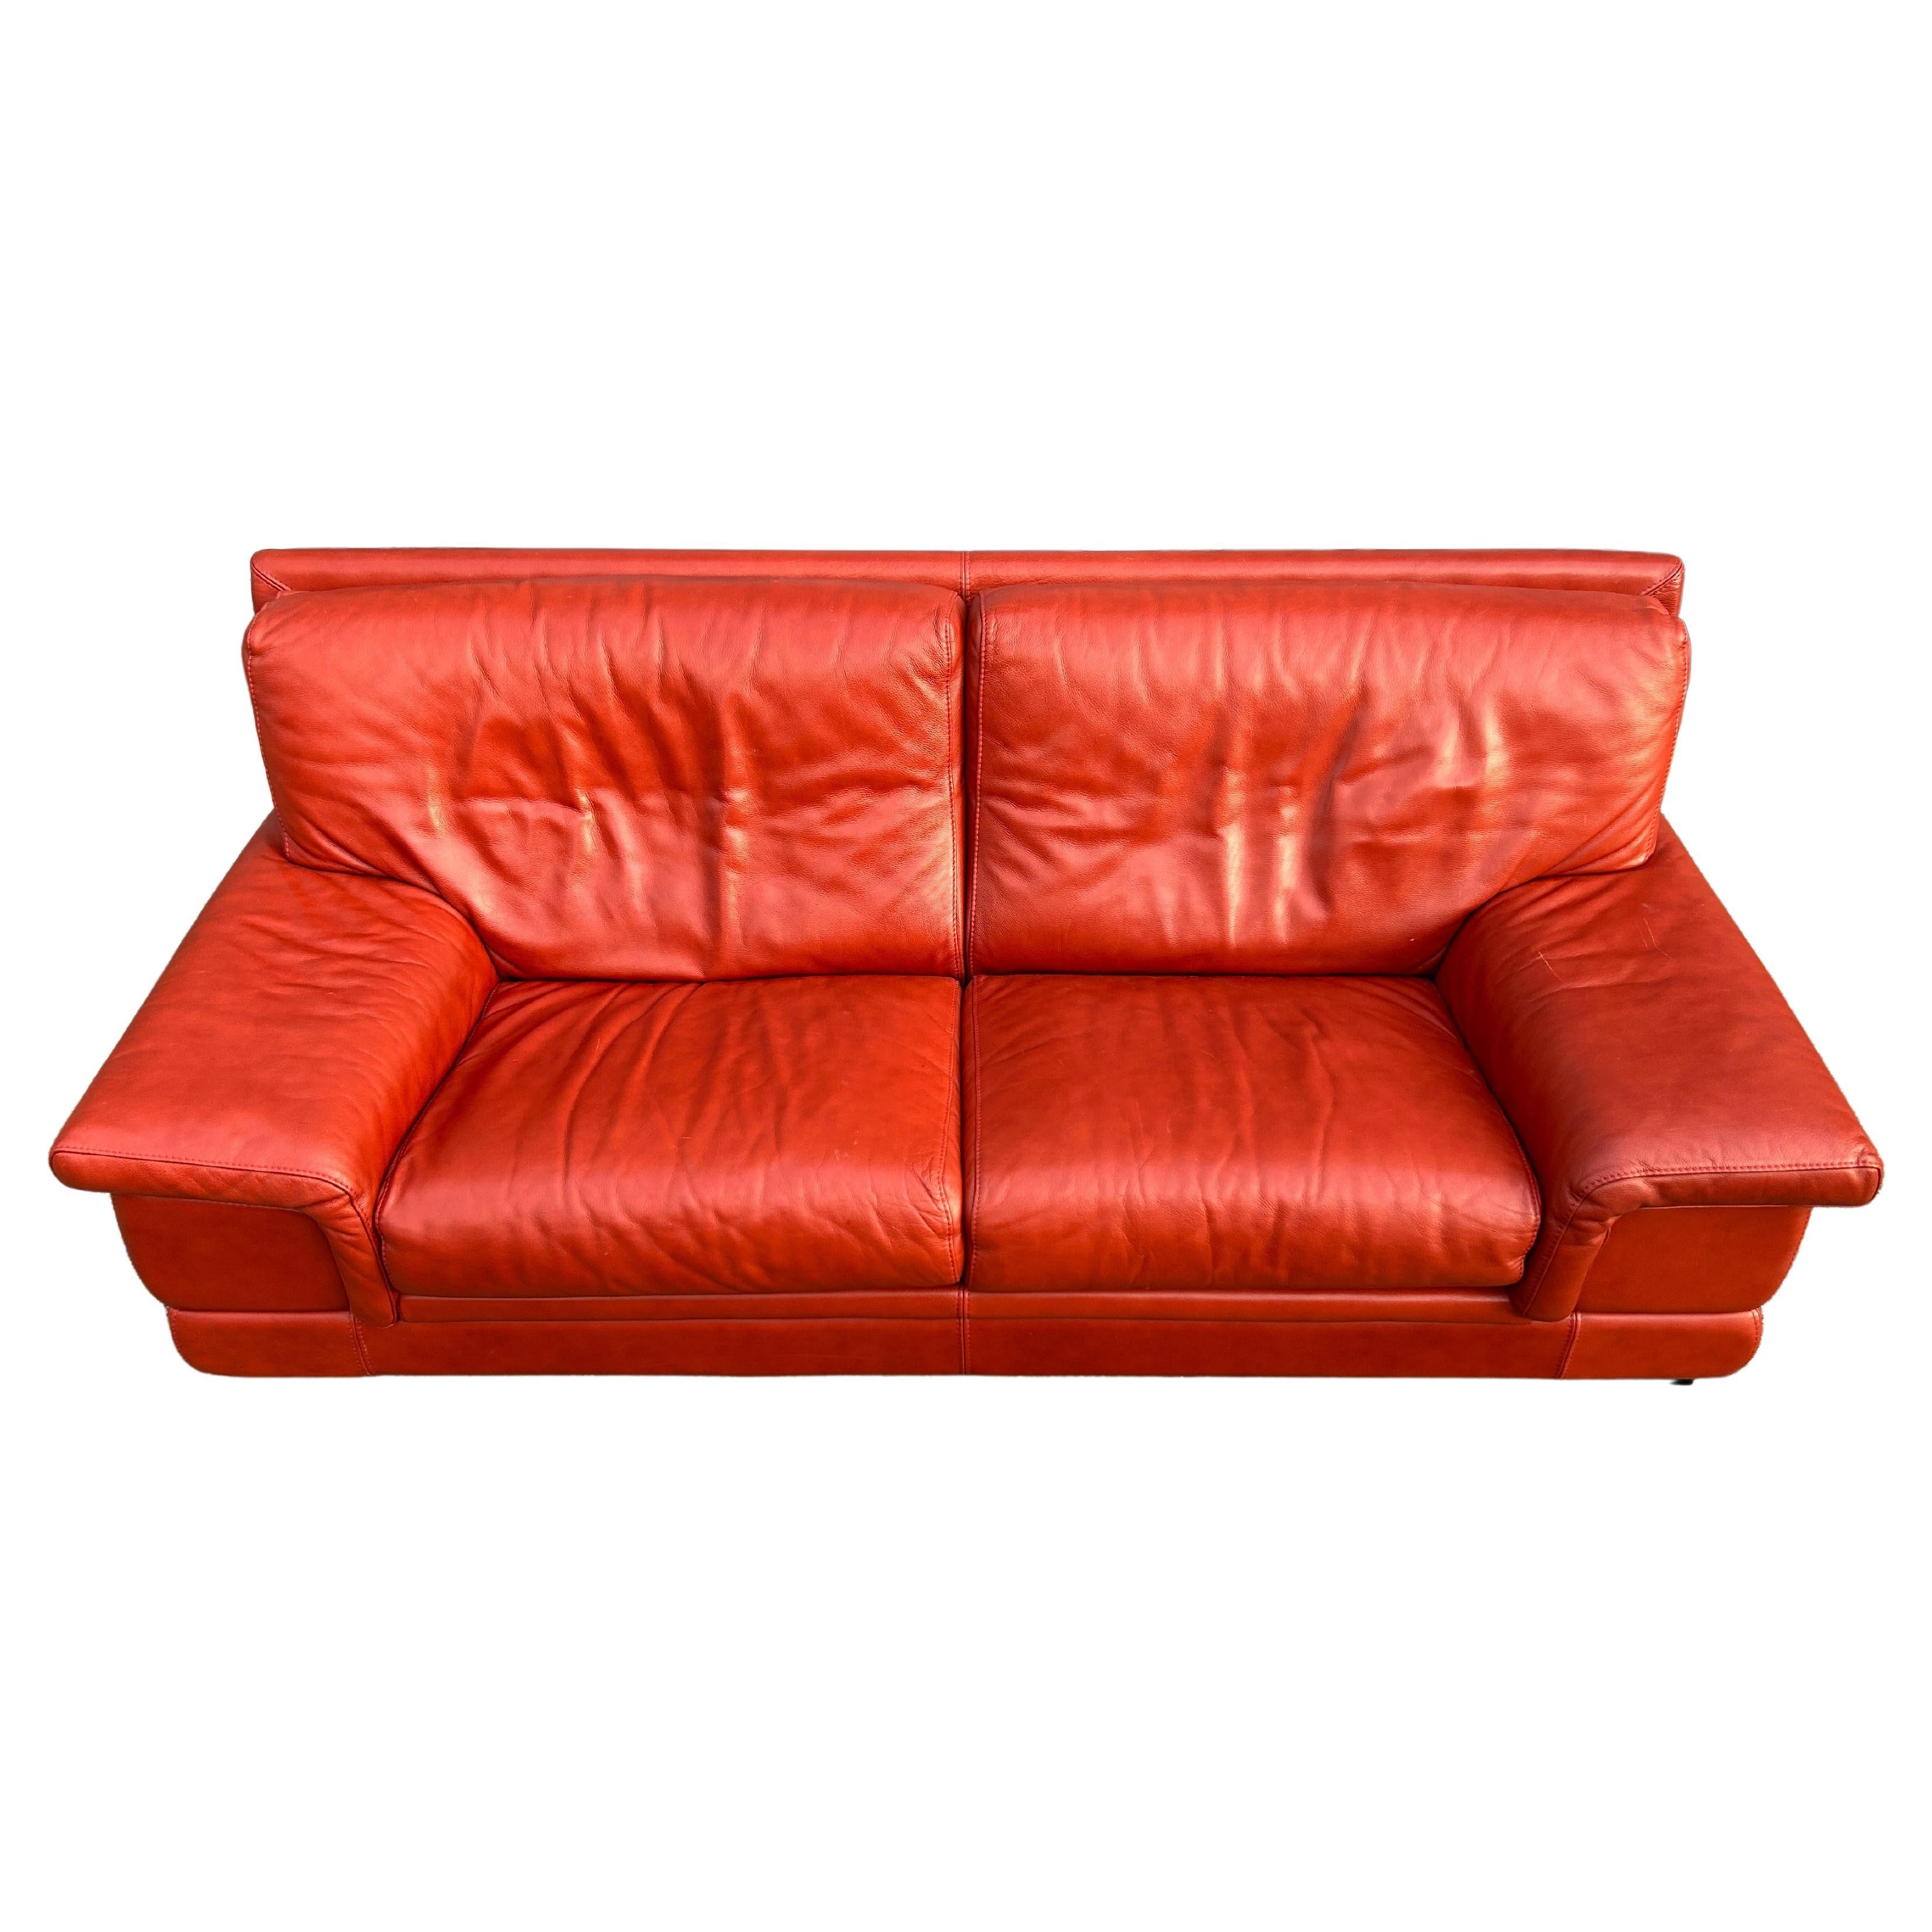 Woodwork Mid Century Post Modern Italian Red Leather 3 seat Sofa by Roche Bobois 